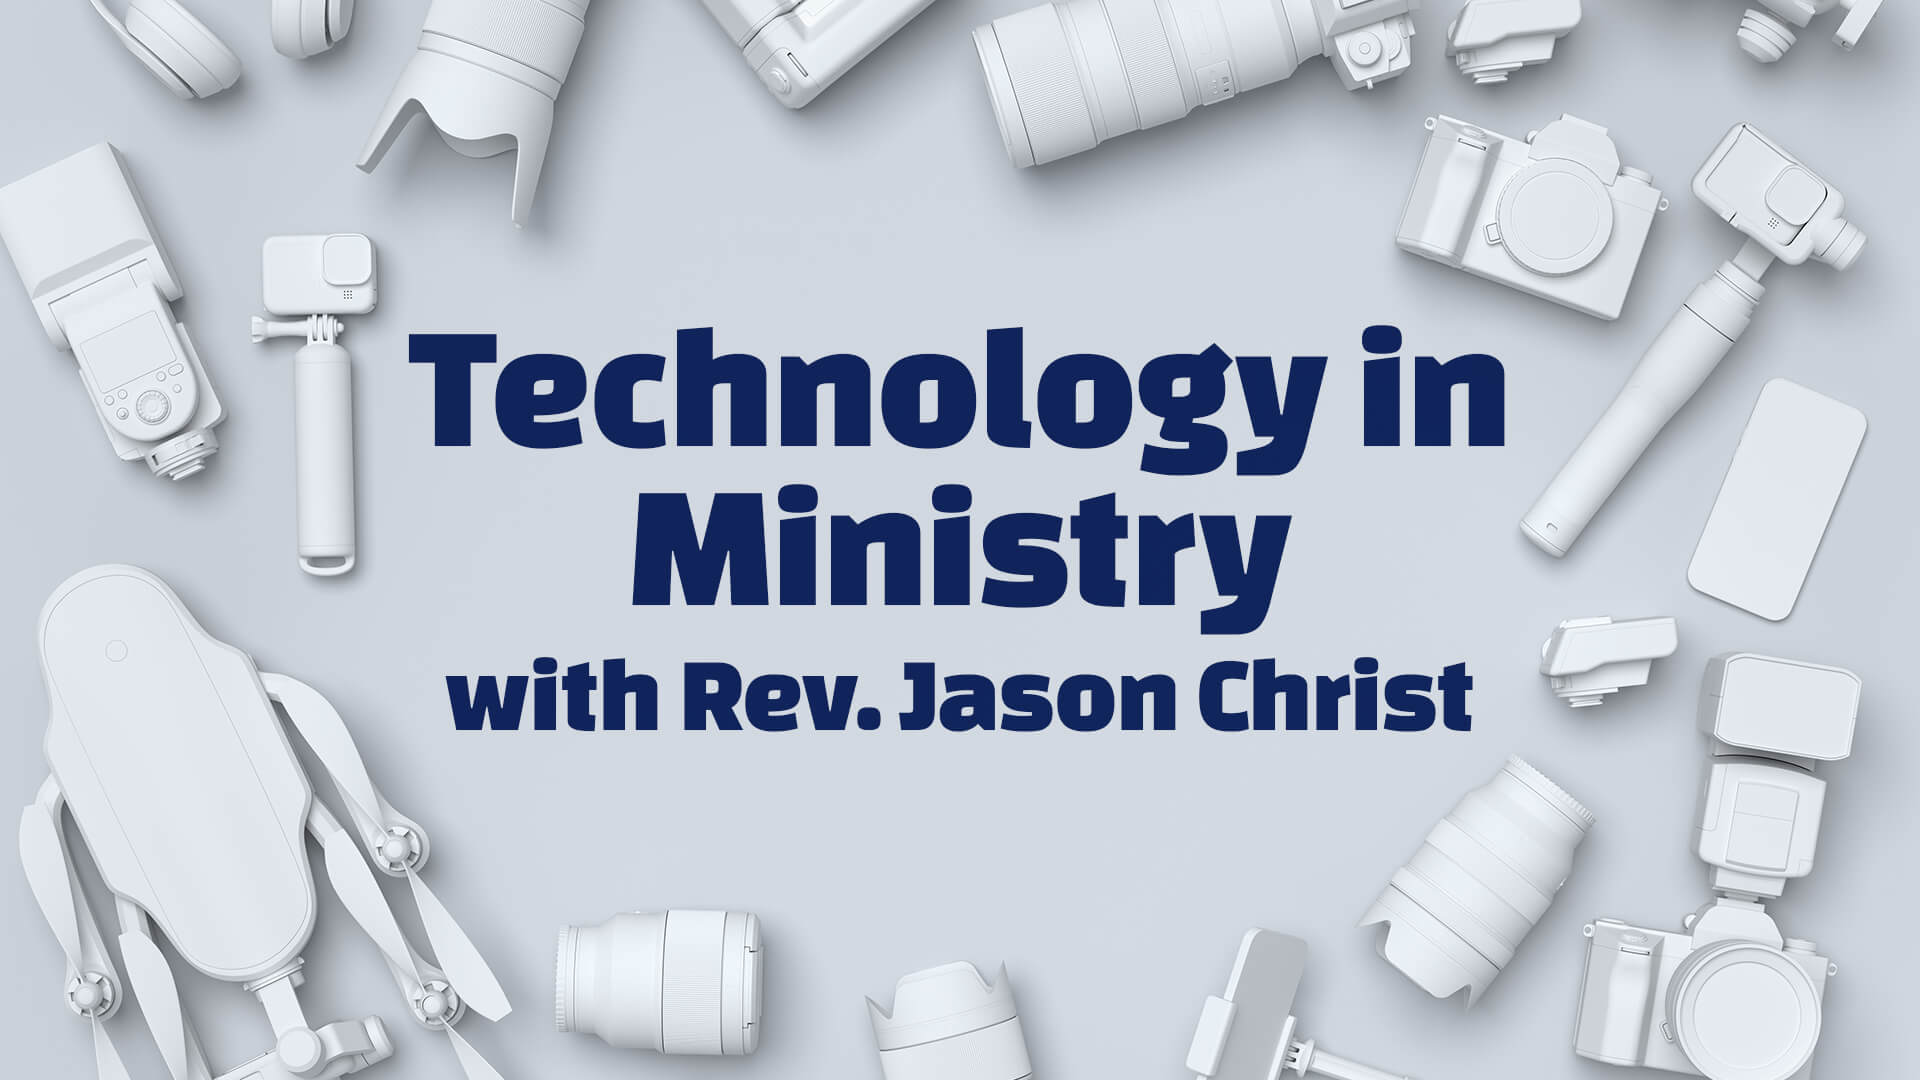 Technology in Ministry with Rev. Jason Christ